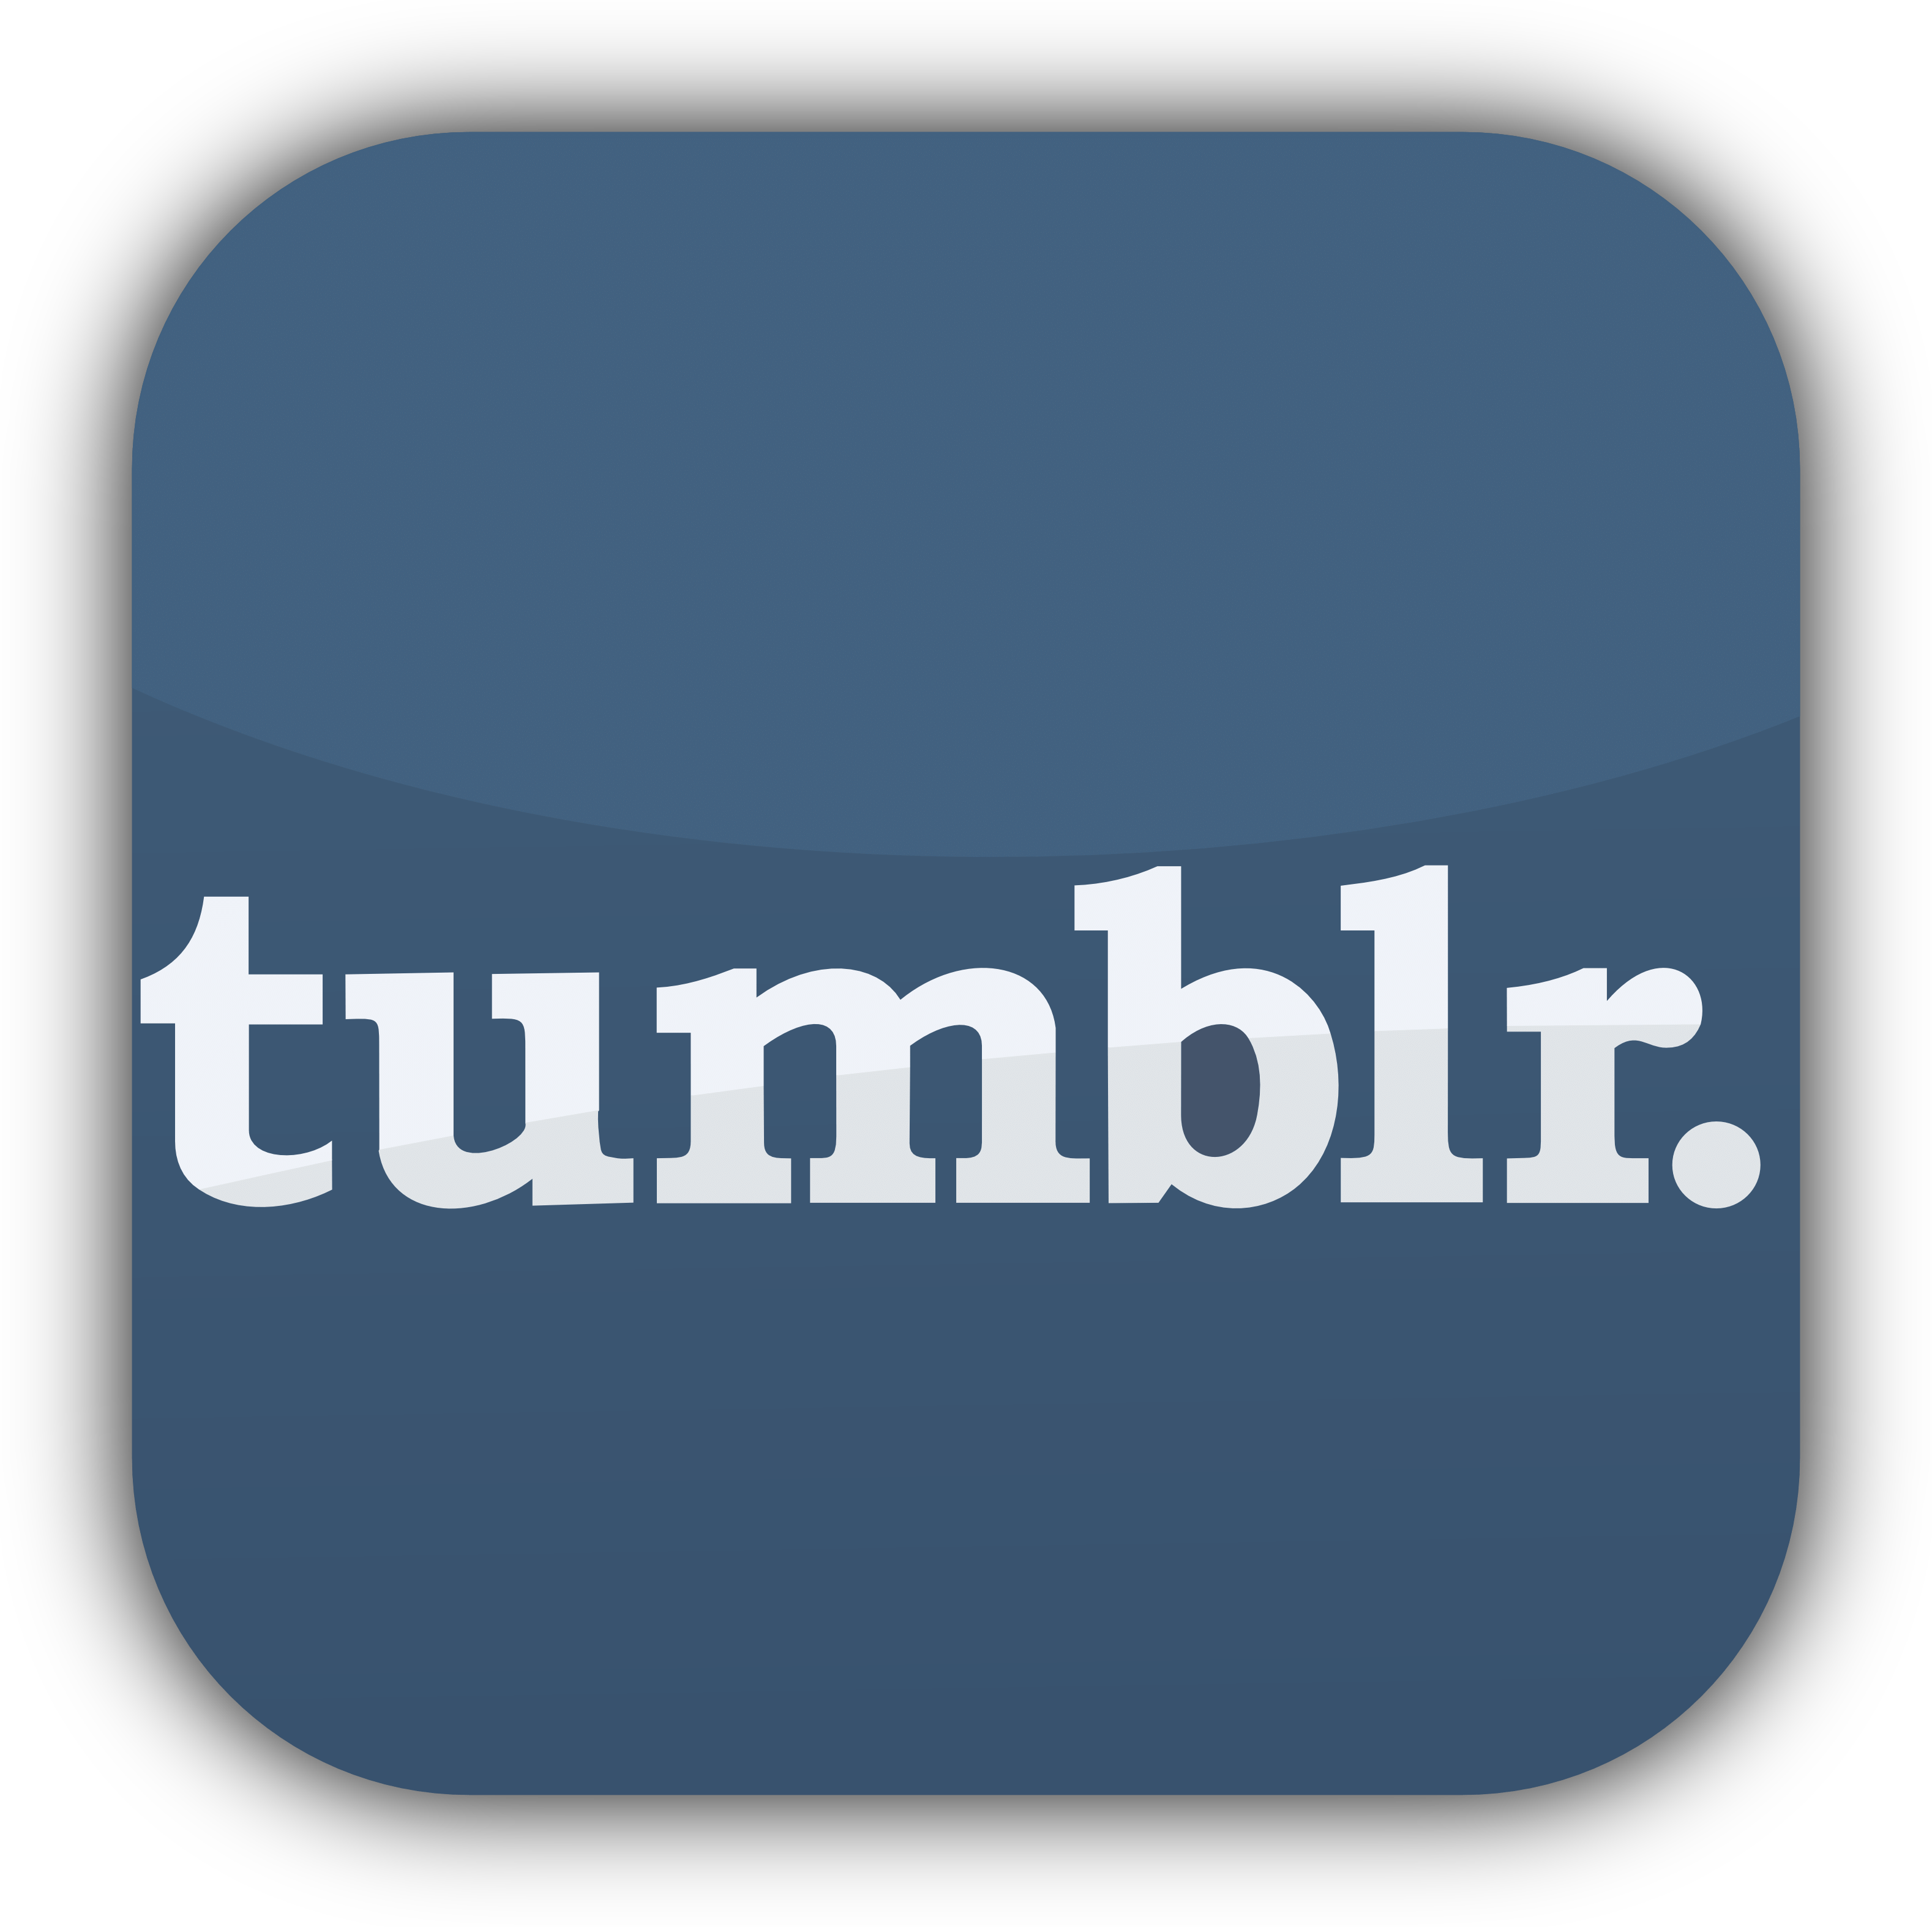 Download Tumblr Logo Clipart - Social Media PNG Image with No Backgroud - P...